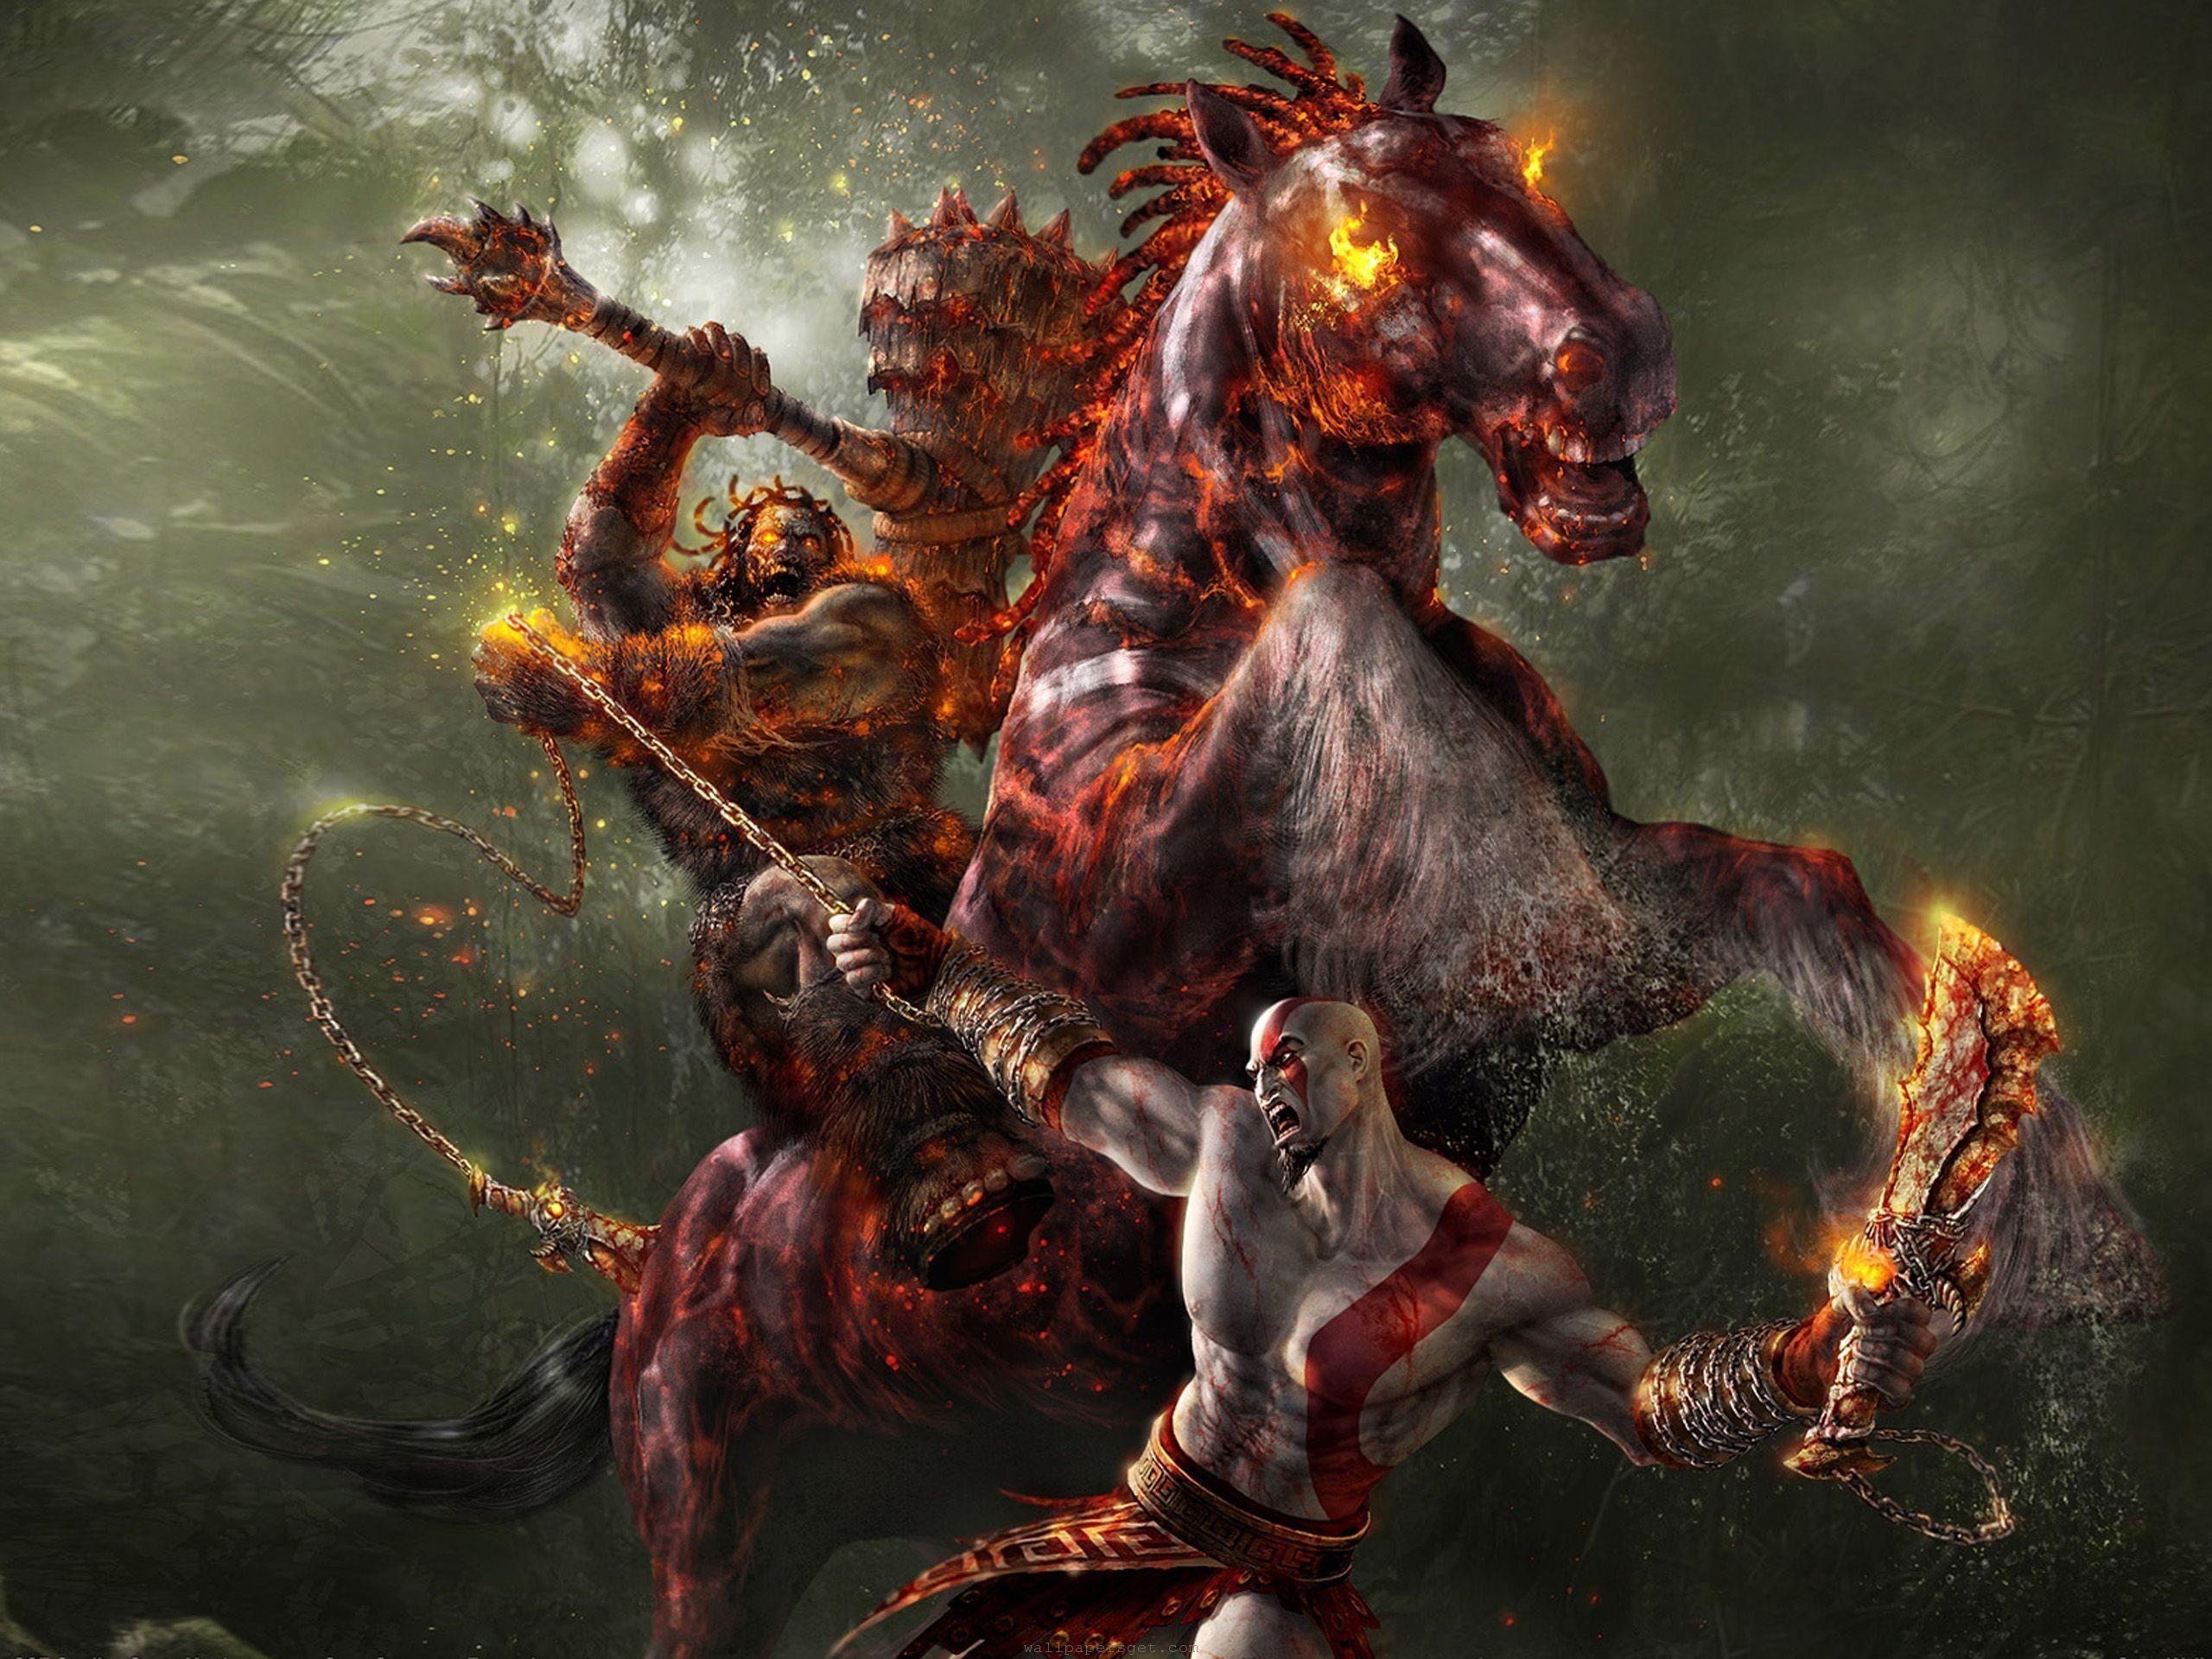 God of War: Ascension: the kratos wallpaper and image